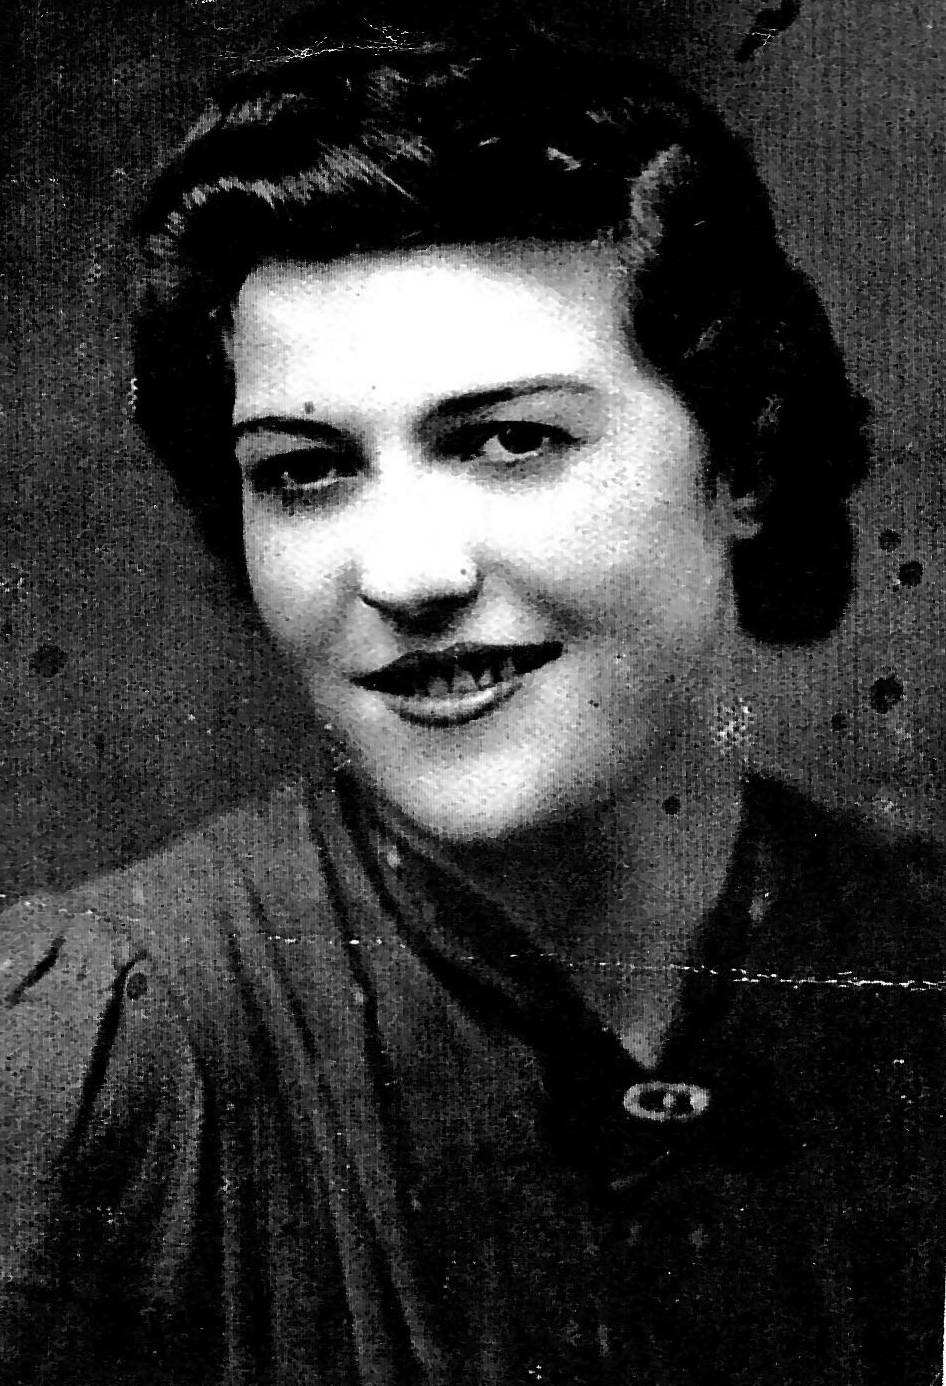 black and white family photograph of a woman with black hair and dark eyes smiling at the camera